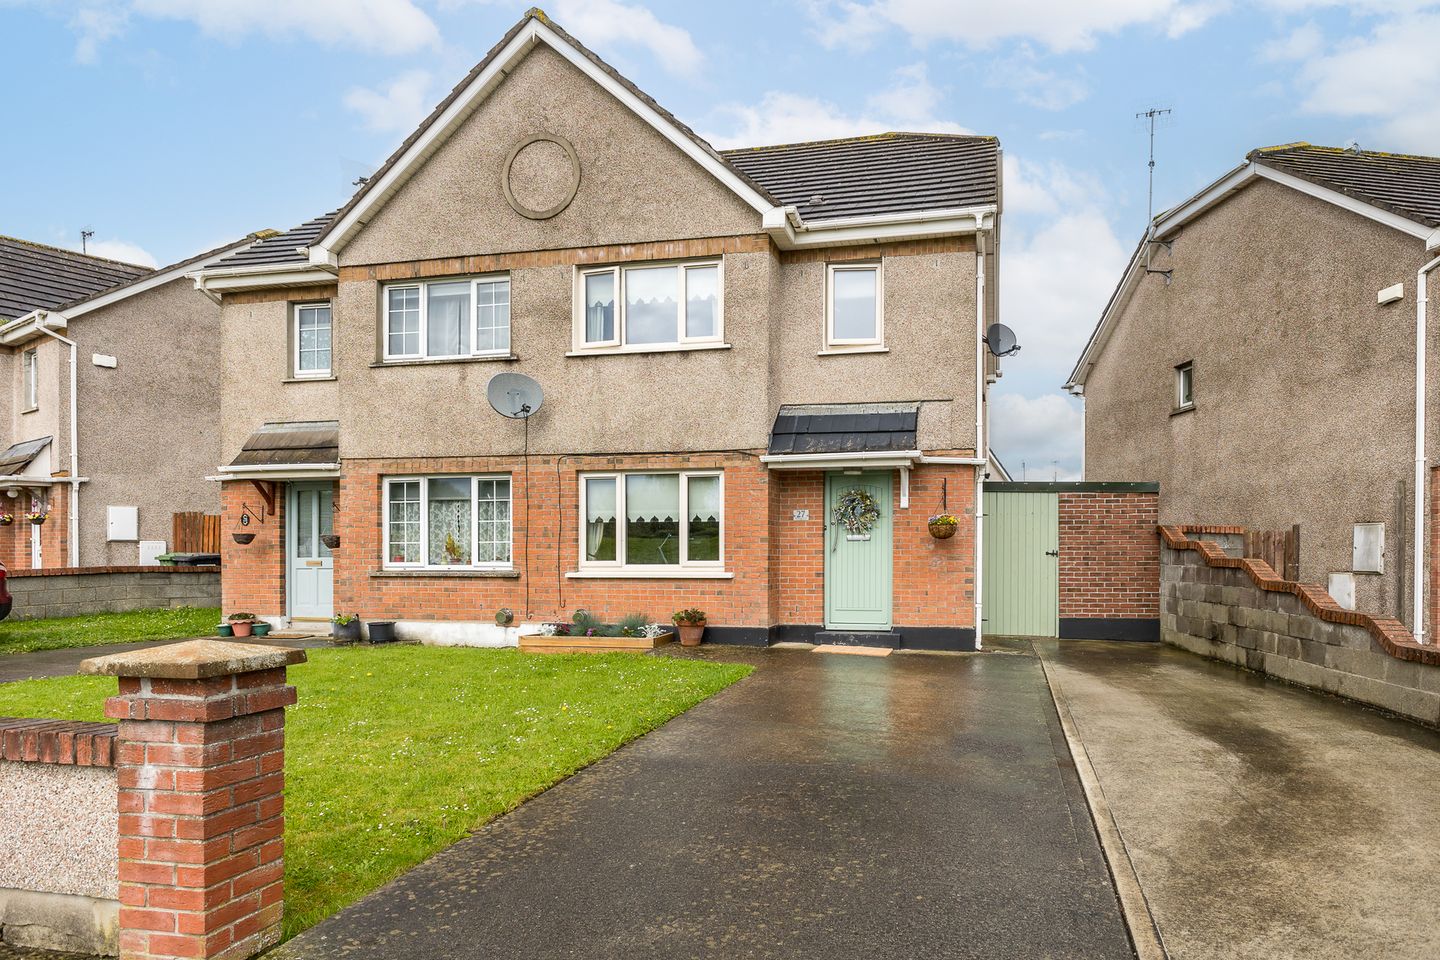 27 Cherrywood Drive, Termon Abbey, Drogheda, Co. Louth